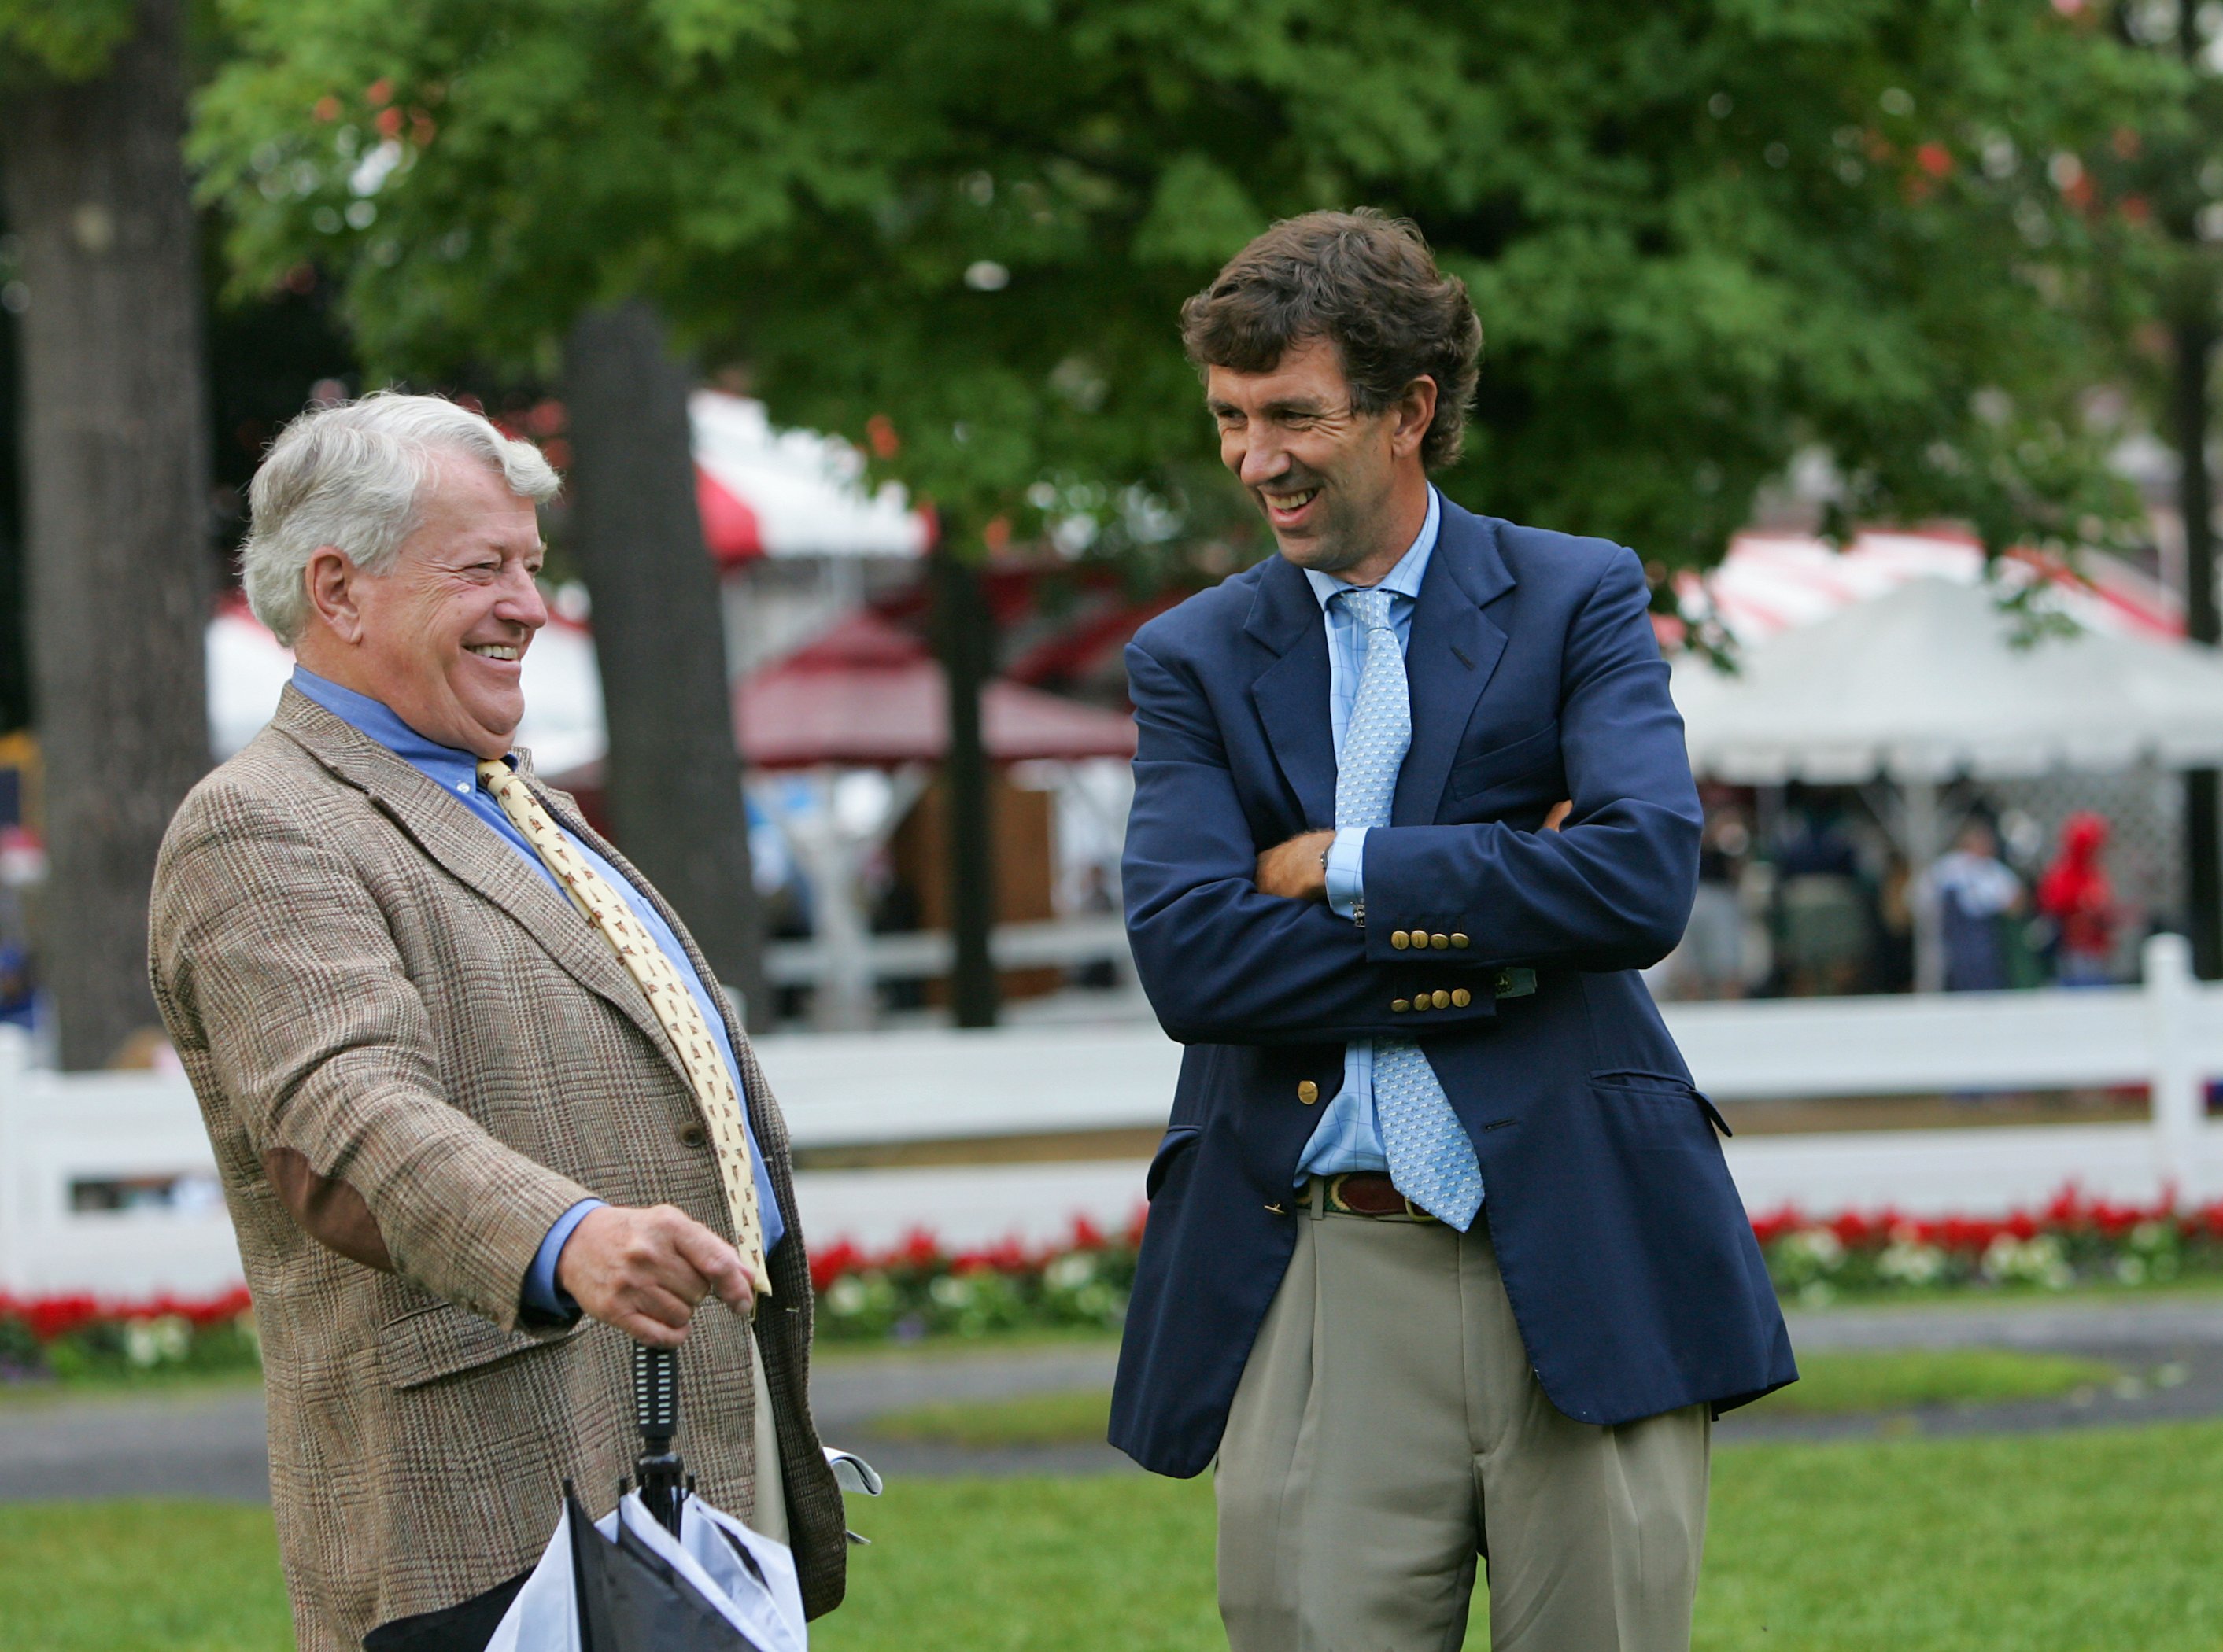 Jack Fisher and Sonny Via at Saratoga Race Course (Tod Marks)